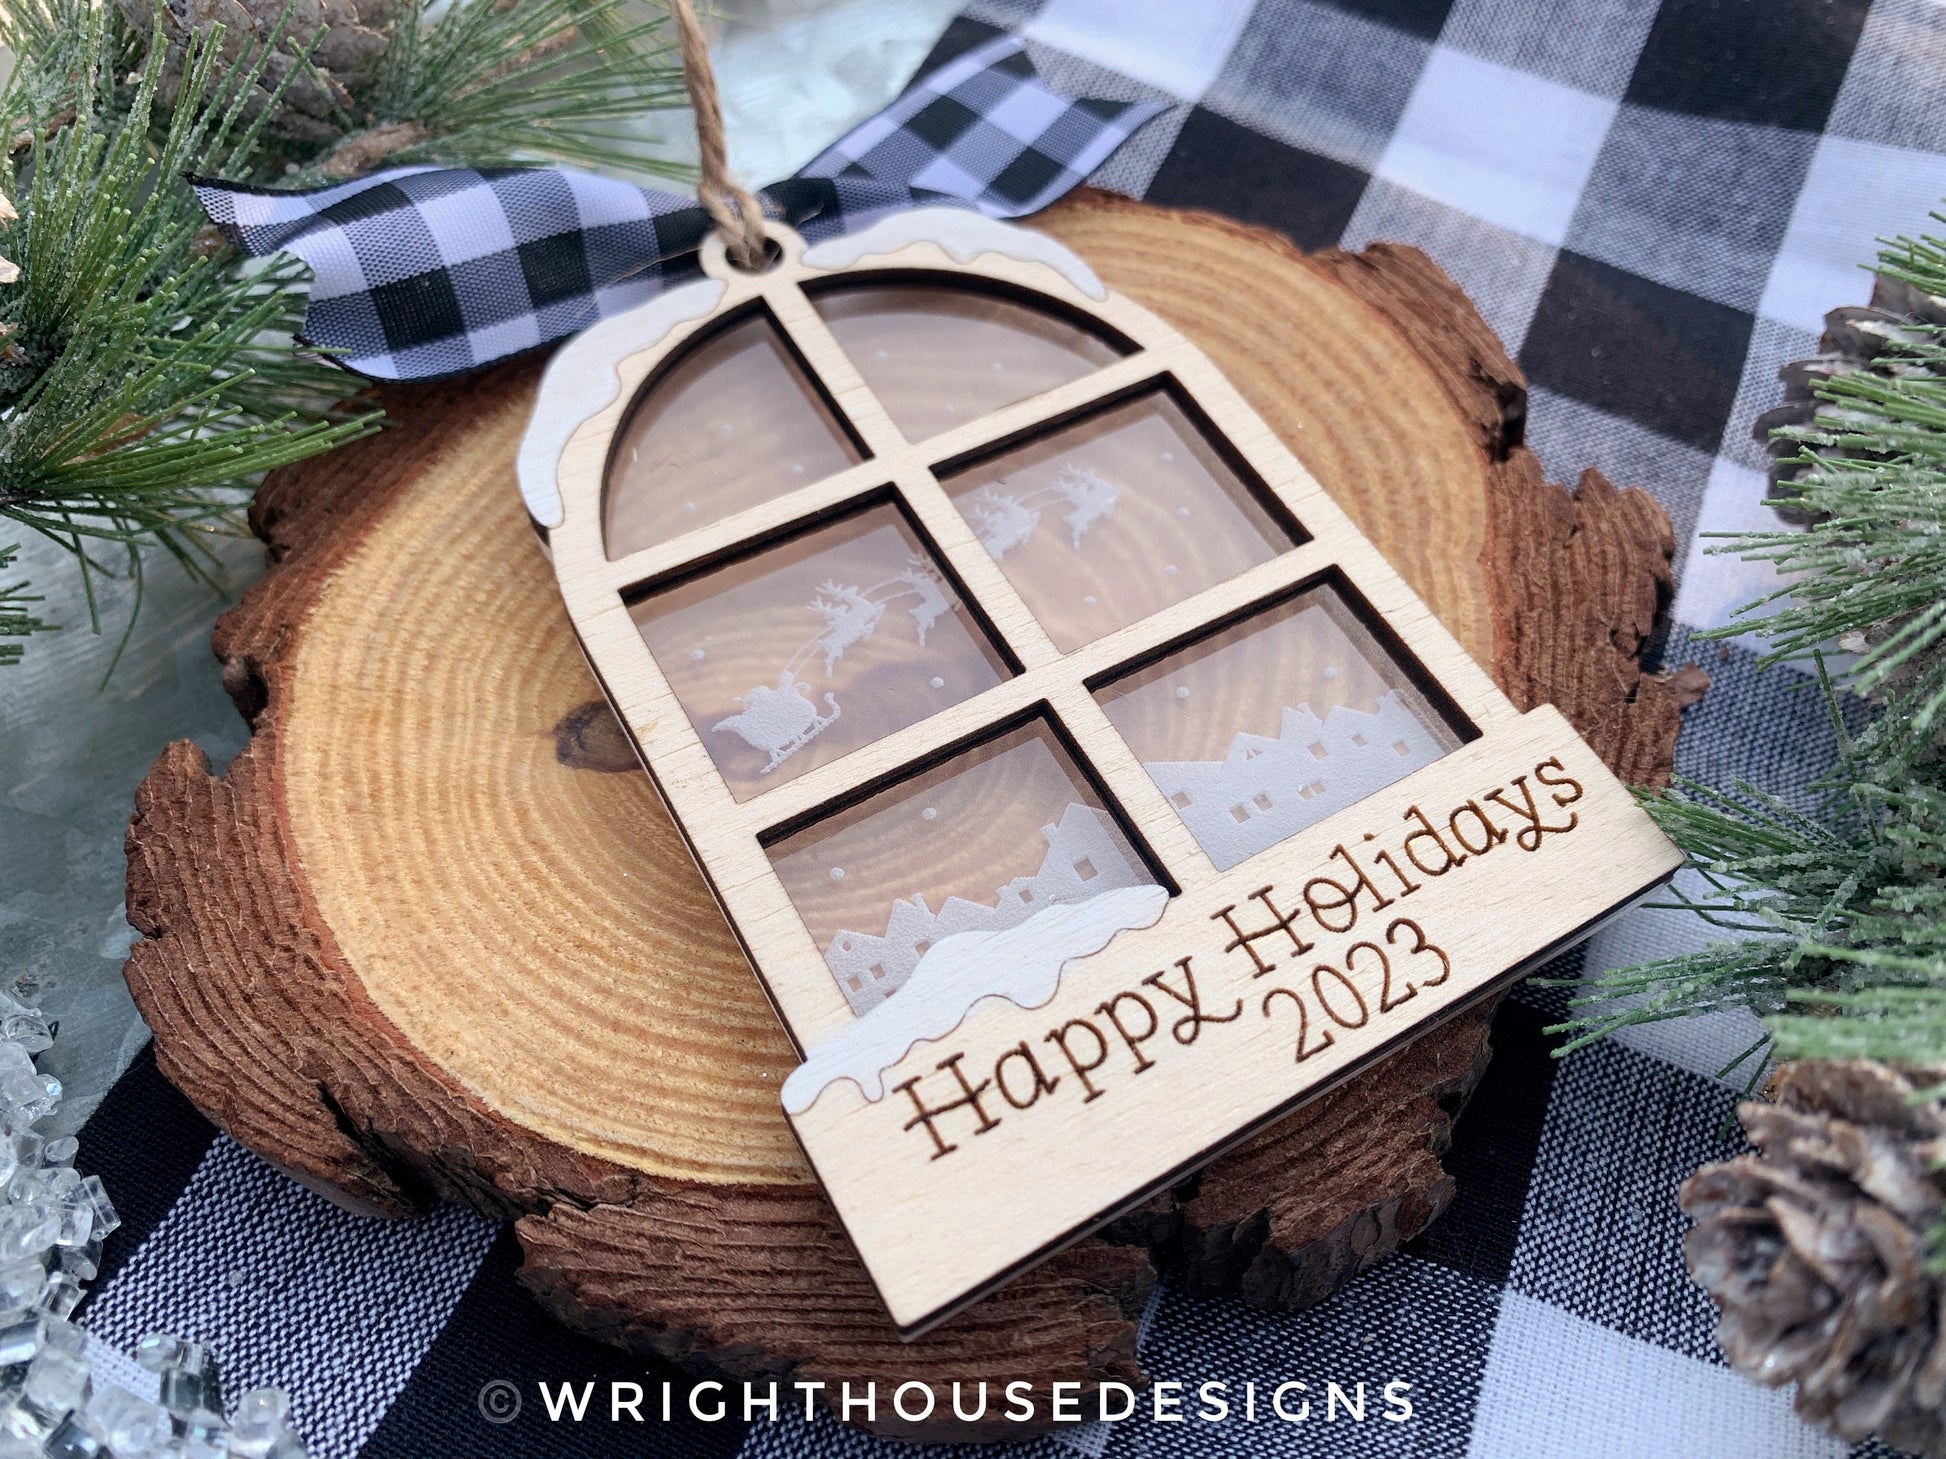 Santa Sleigh Winter Cityscape Scene Ornament - Engraved Personalized Christmas Eve Tree Ornament - Layered Wood and Acrylic Window Ornament